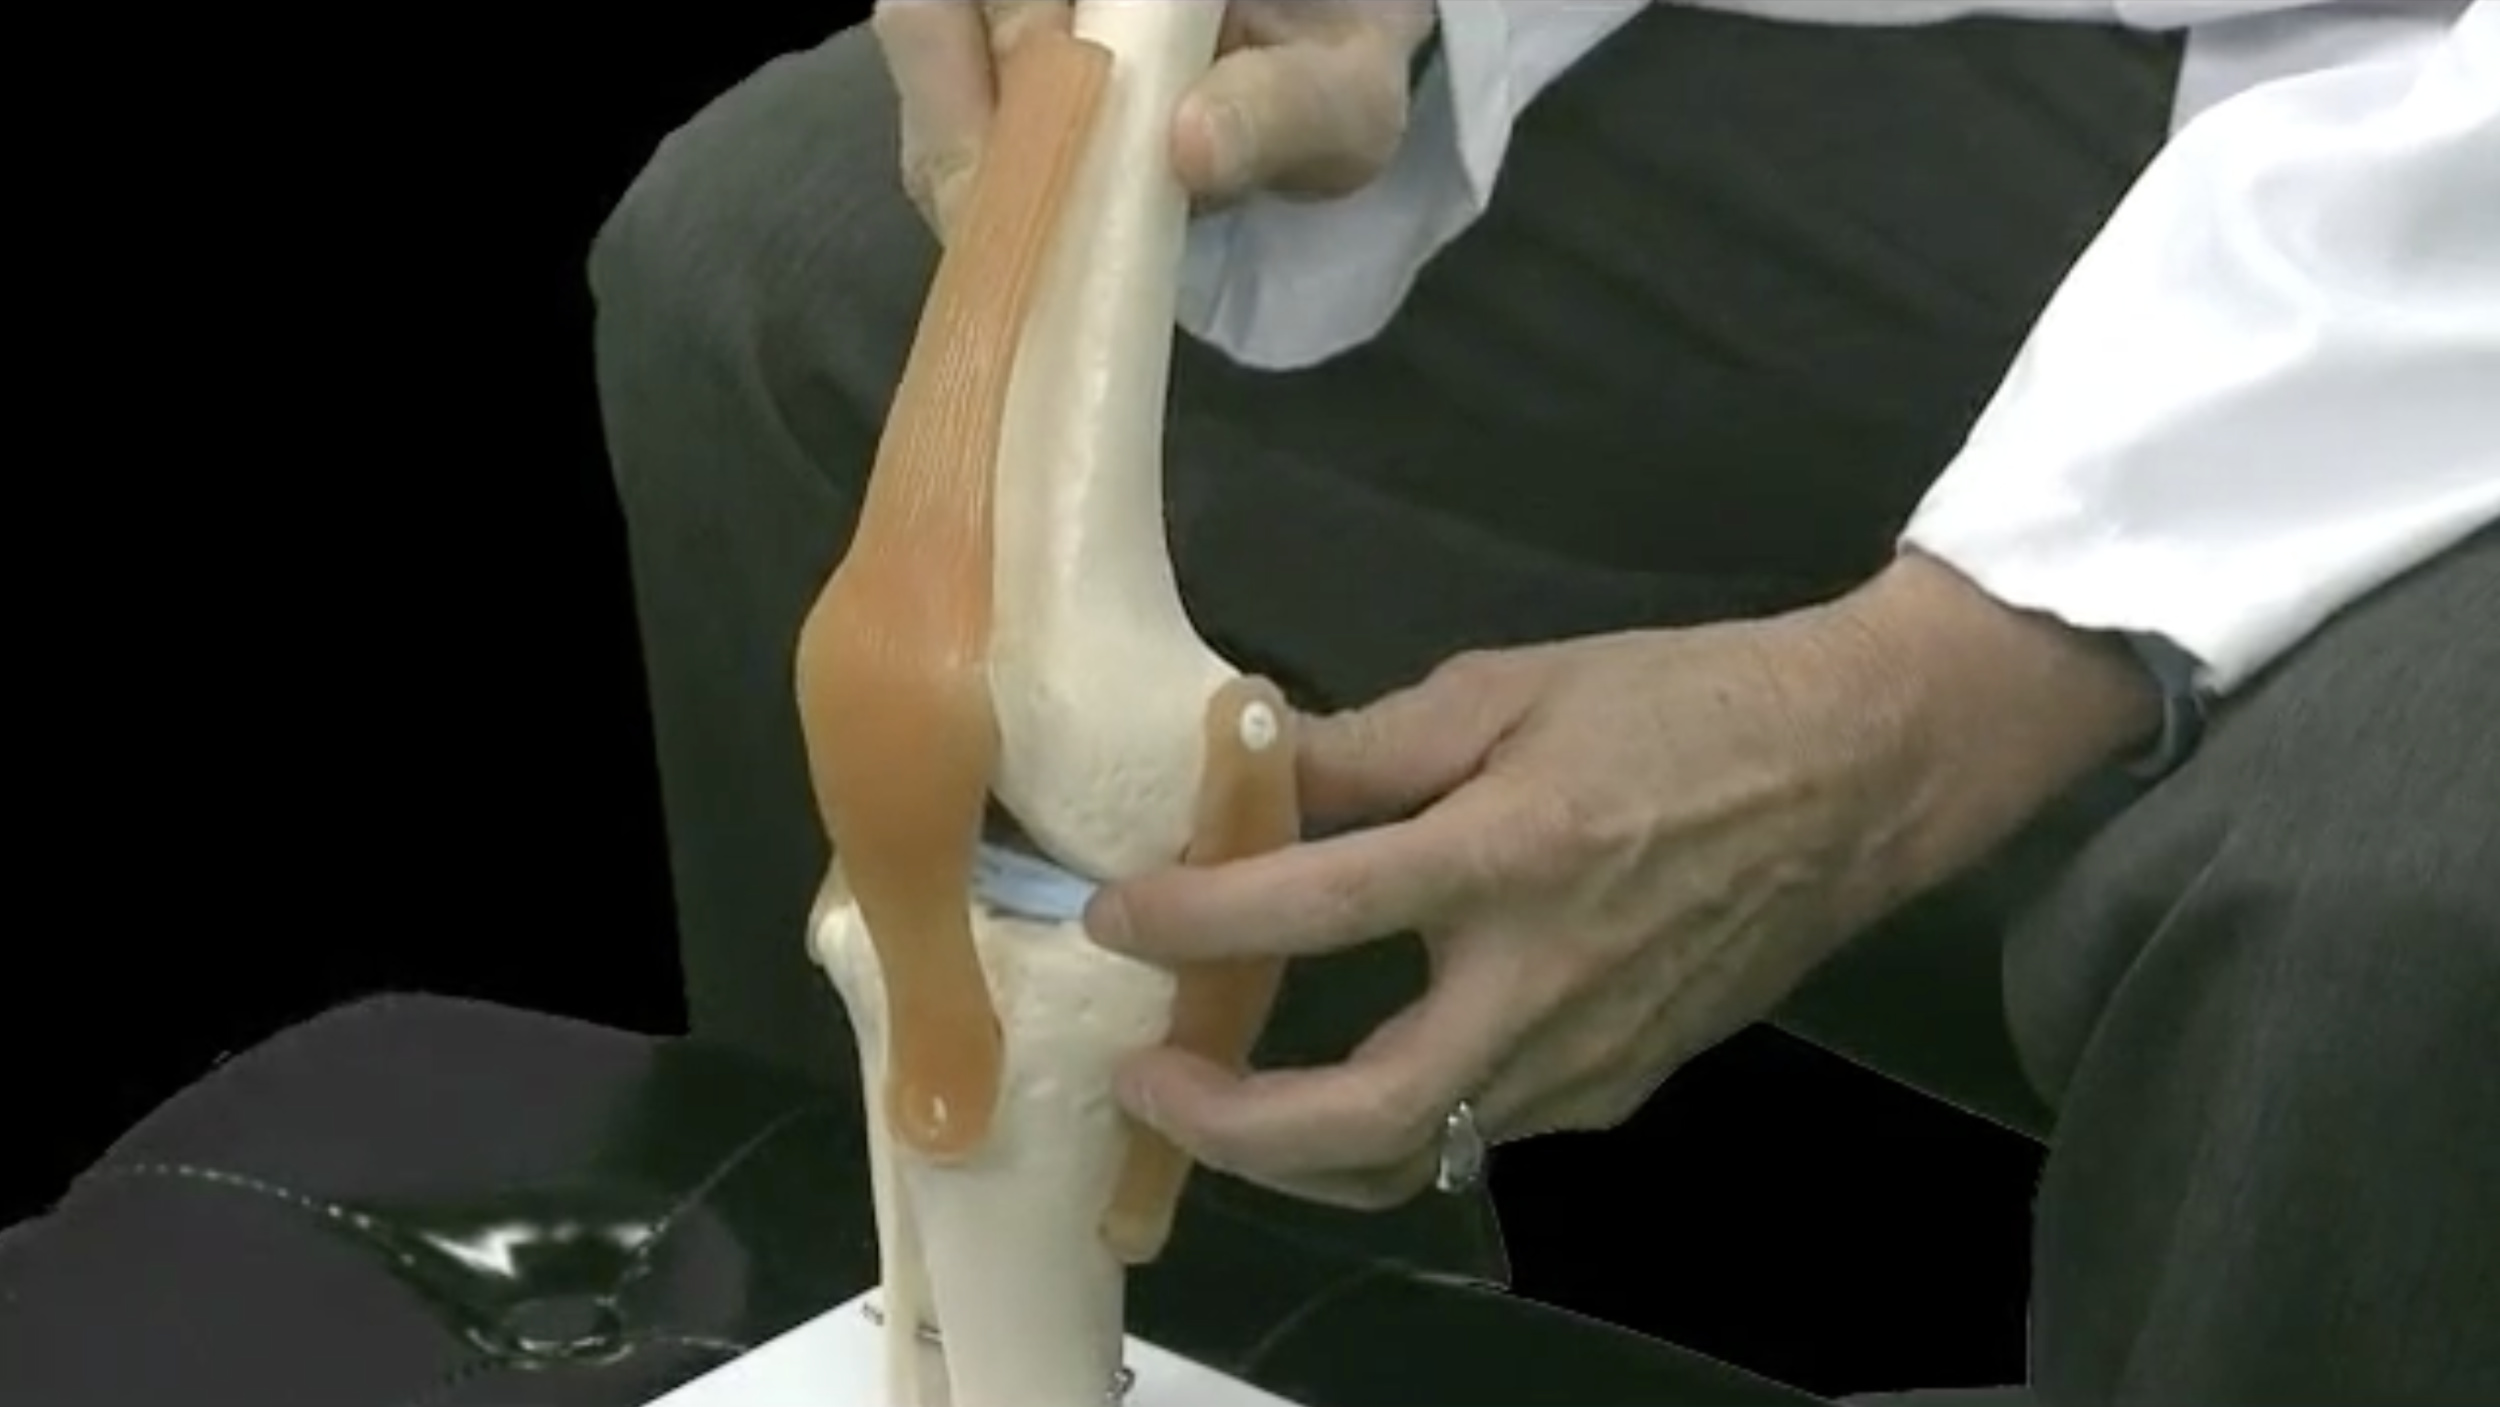 Doctor displaying anatomical model of the knee joint.